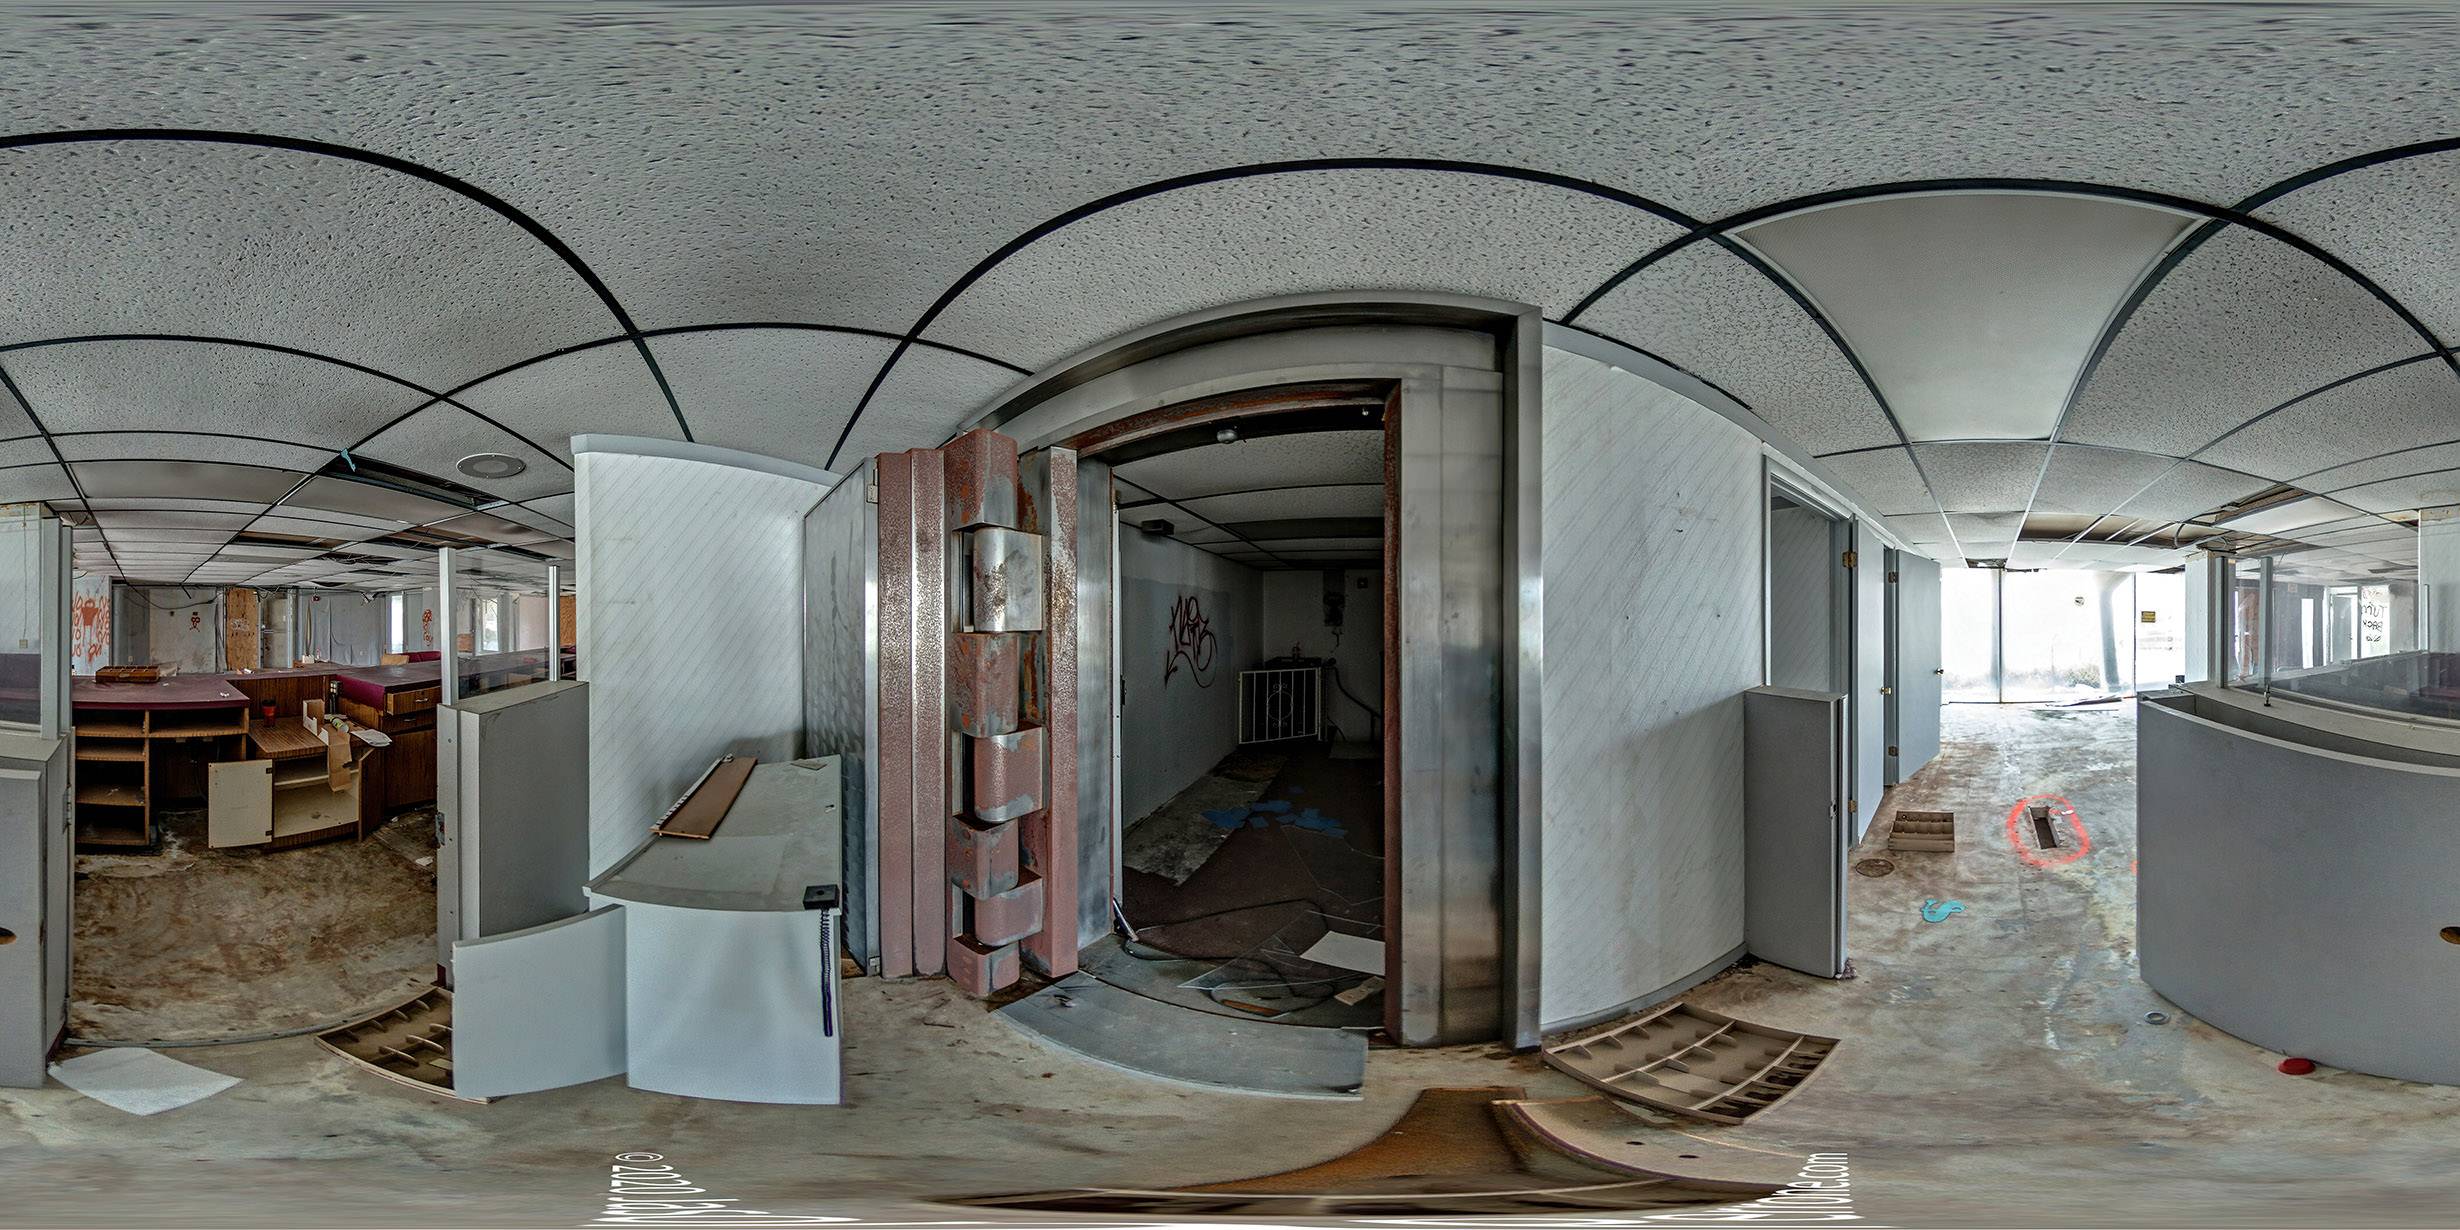 Equirectangular panoramic image of the vault inside the abandoned Glass Bank in Cocoa Beach, Florida